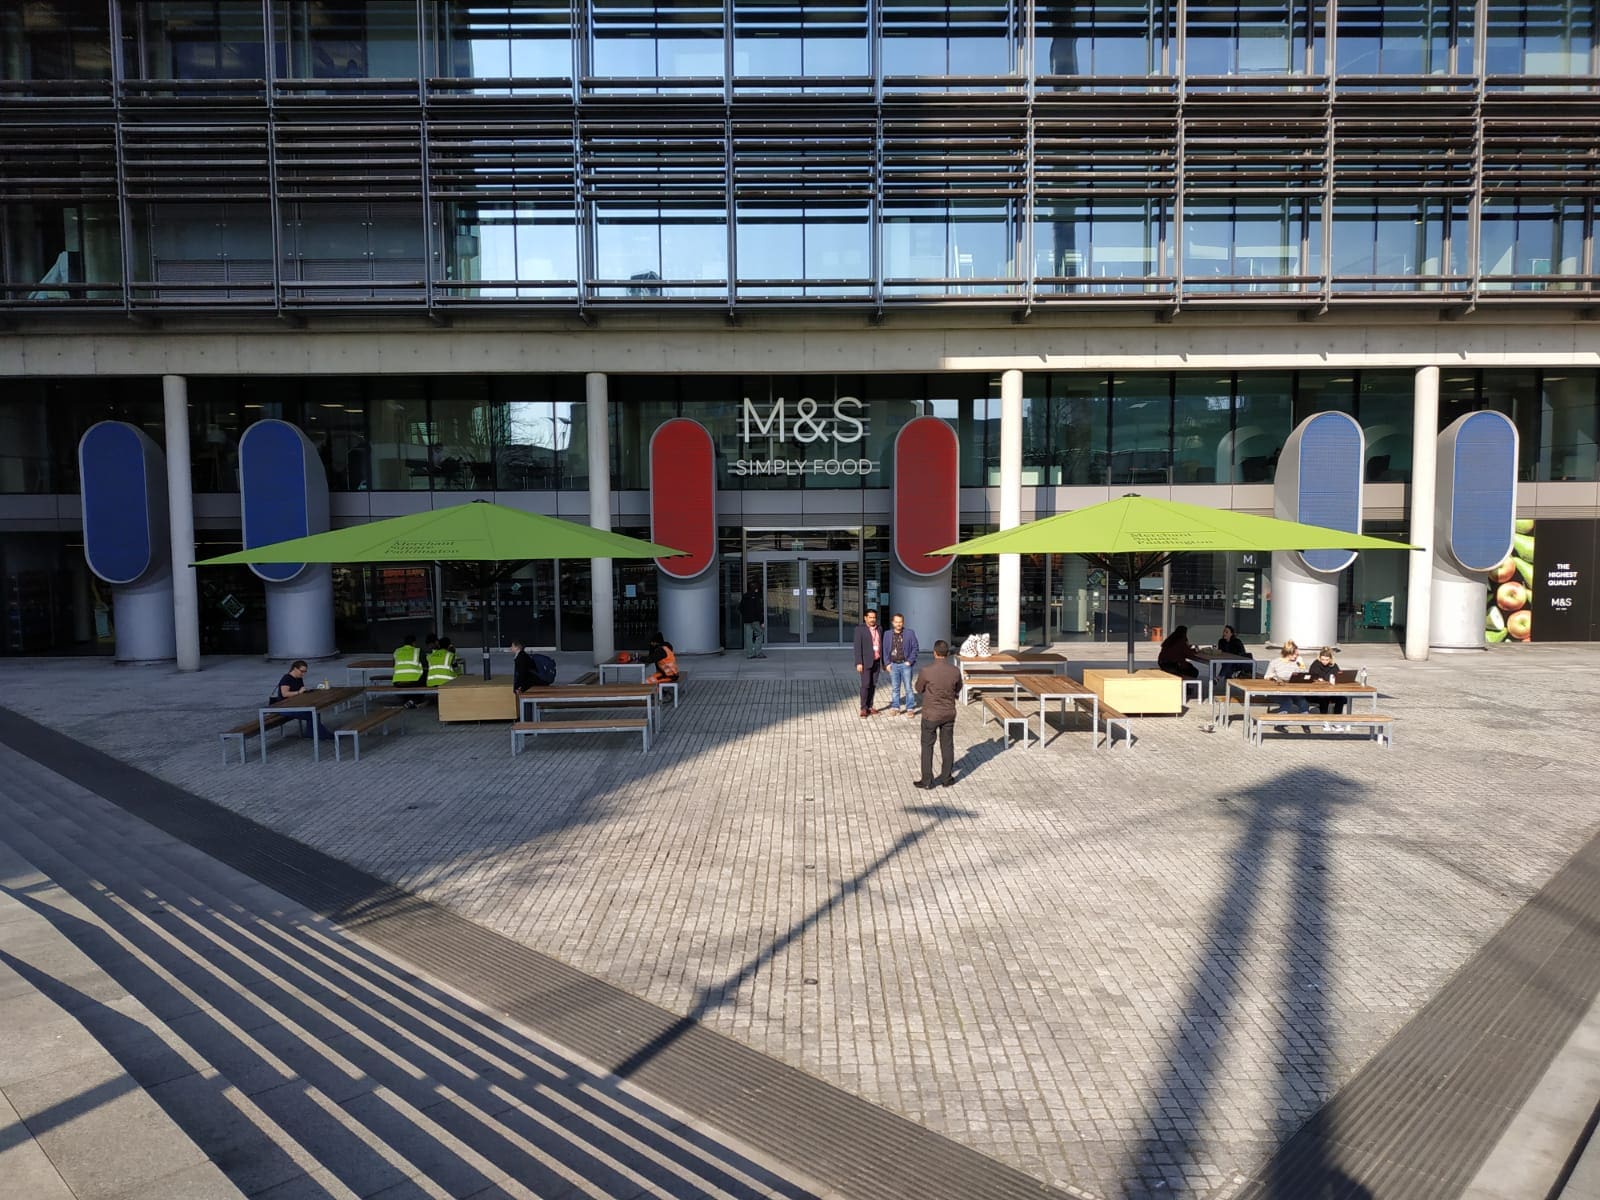 Exterior of M&S building with wooden and metal picnic benches and tables under large square green parasols